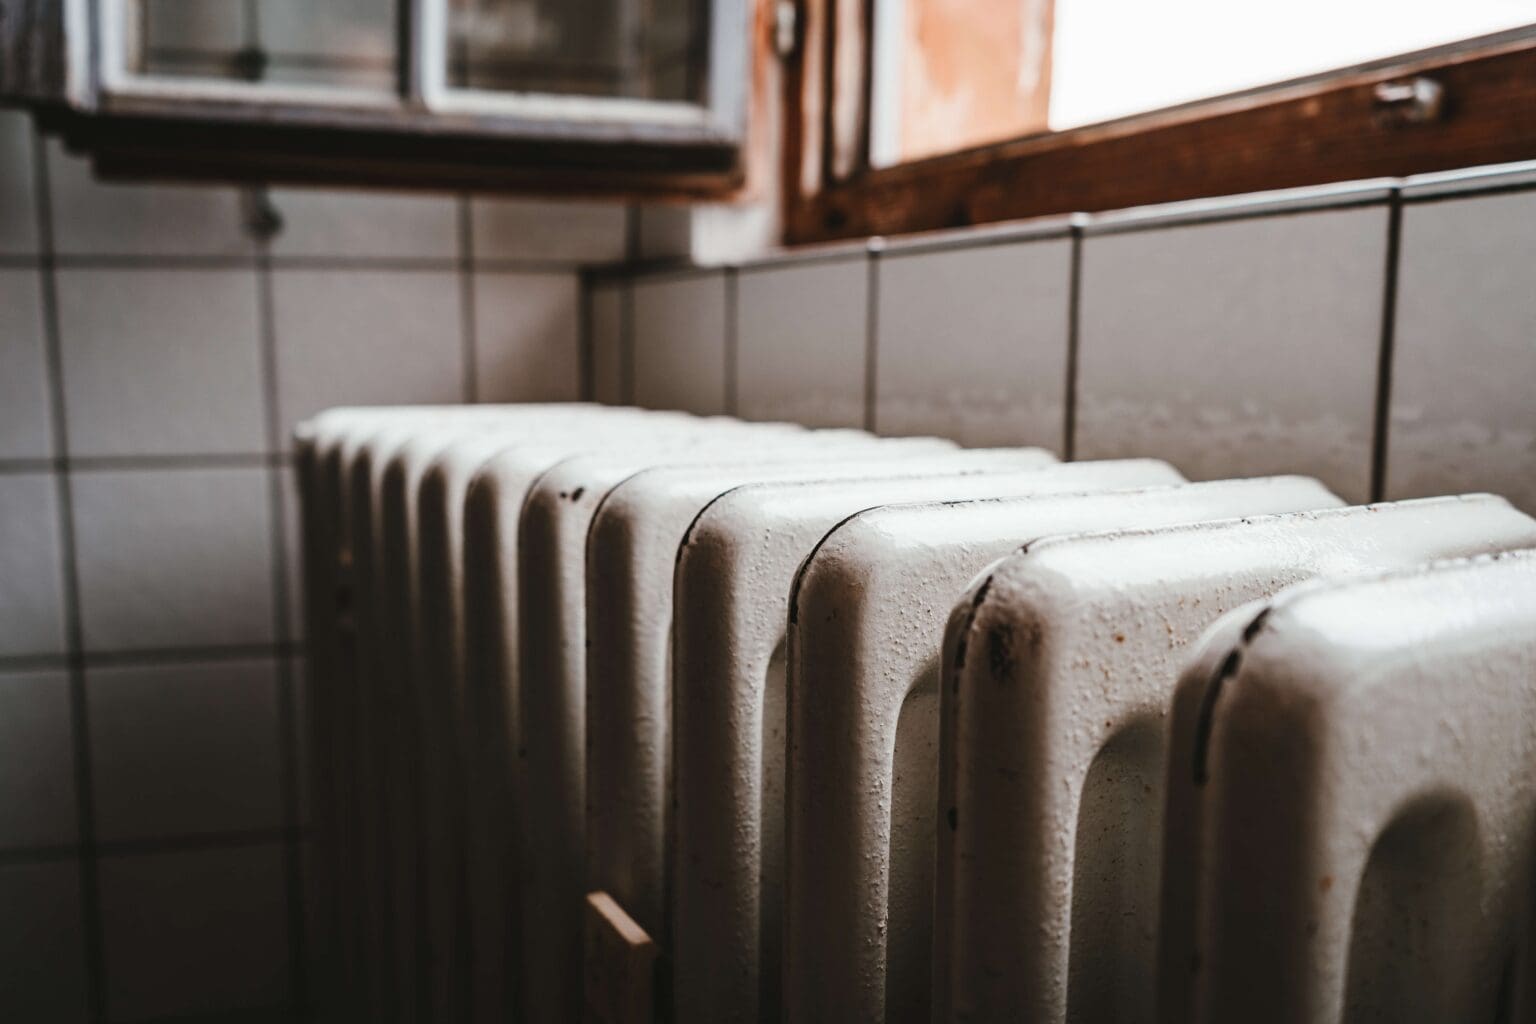 An old white radiator situated below a window in a kitchen with tiled walls, emitting warmth in a dimly lit setting.